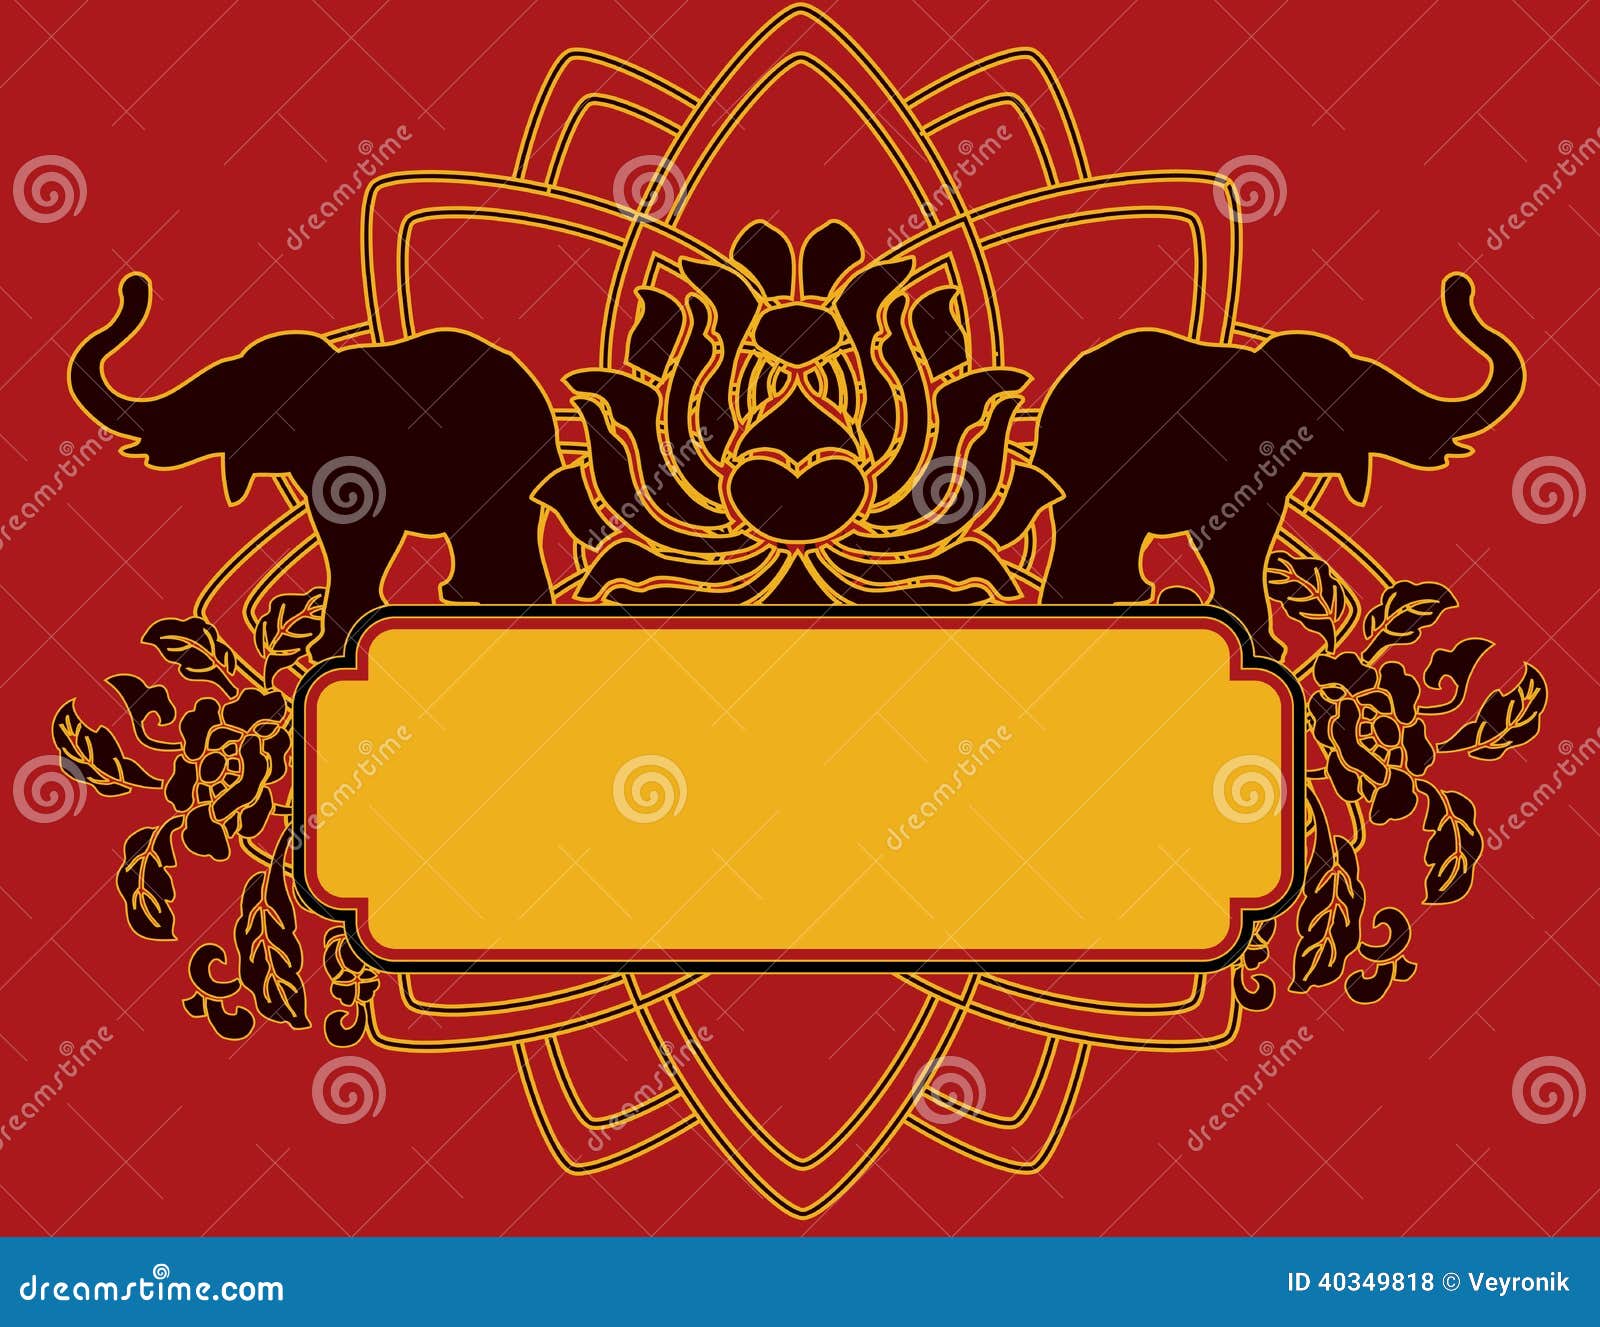 Lotus And Elephant Banner Stock Vector Image 40349818